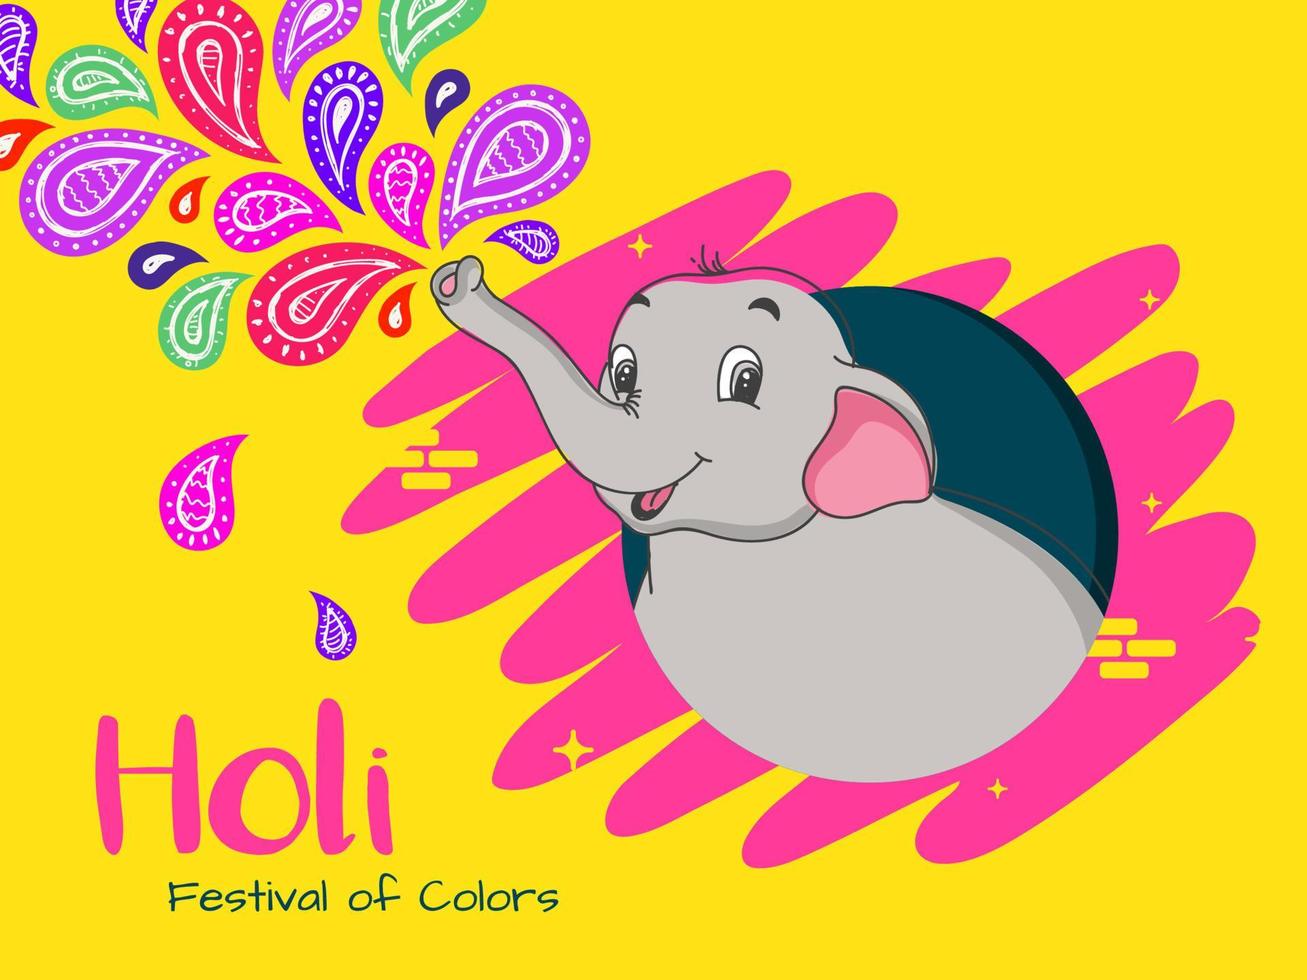 Holi Festival Of Colors Celebration with Cute Elephant Spraying Colors on Yellow Background. vector